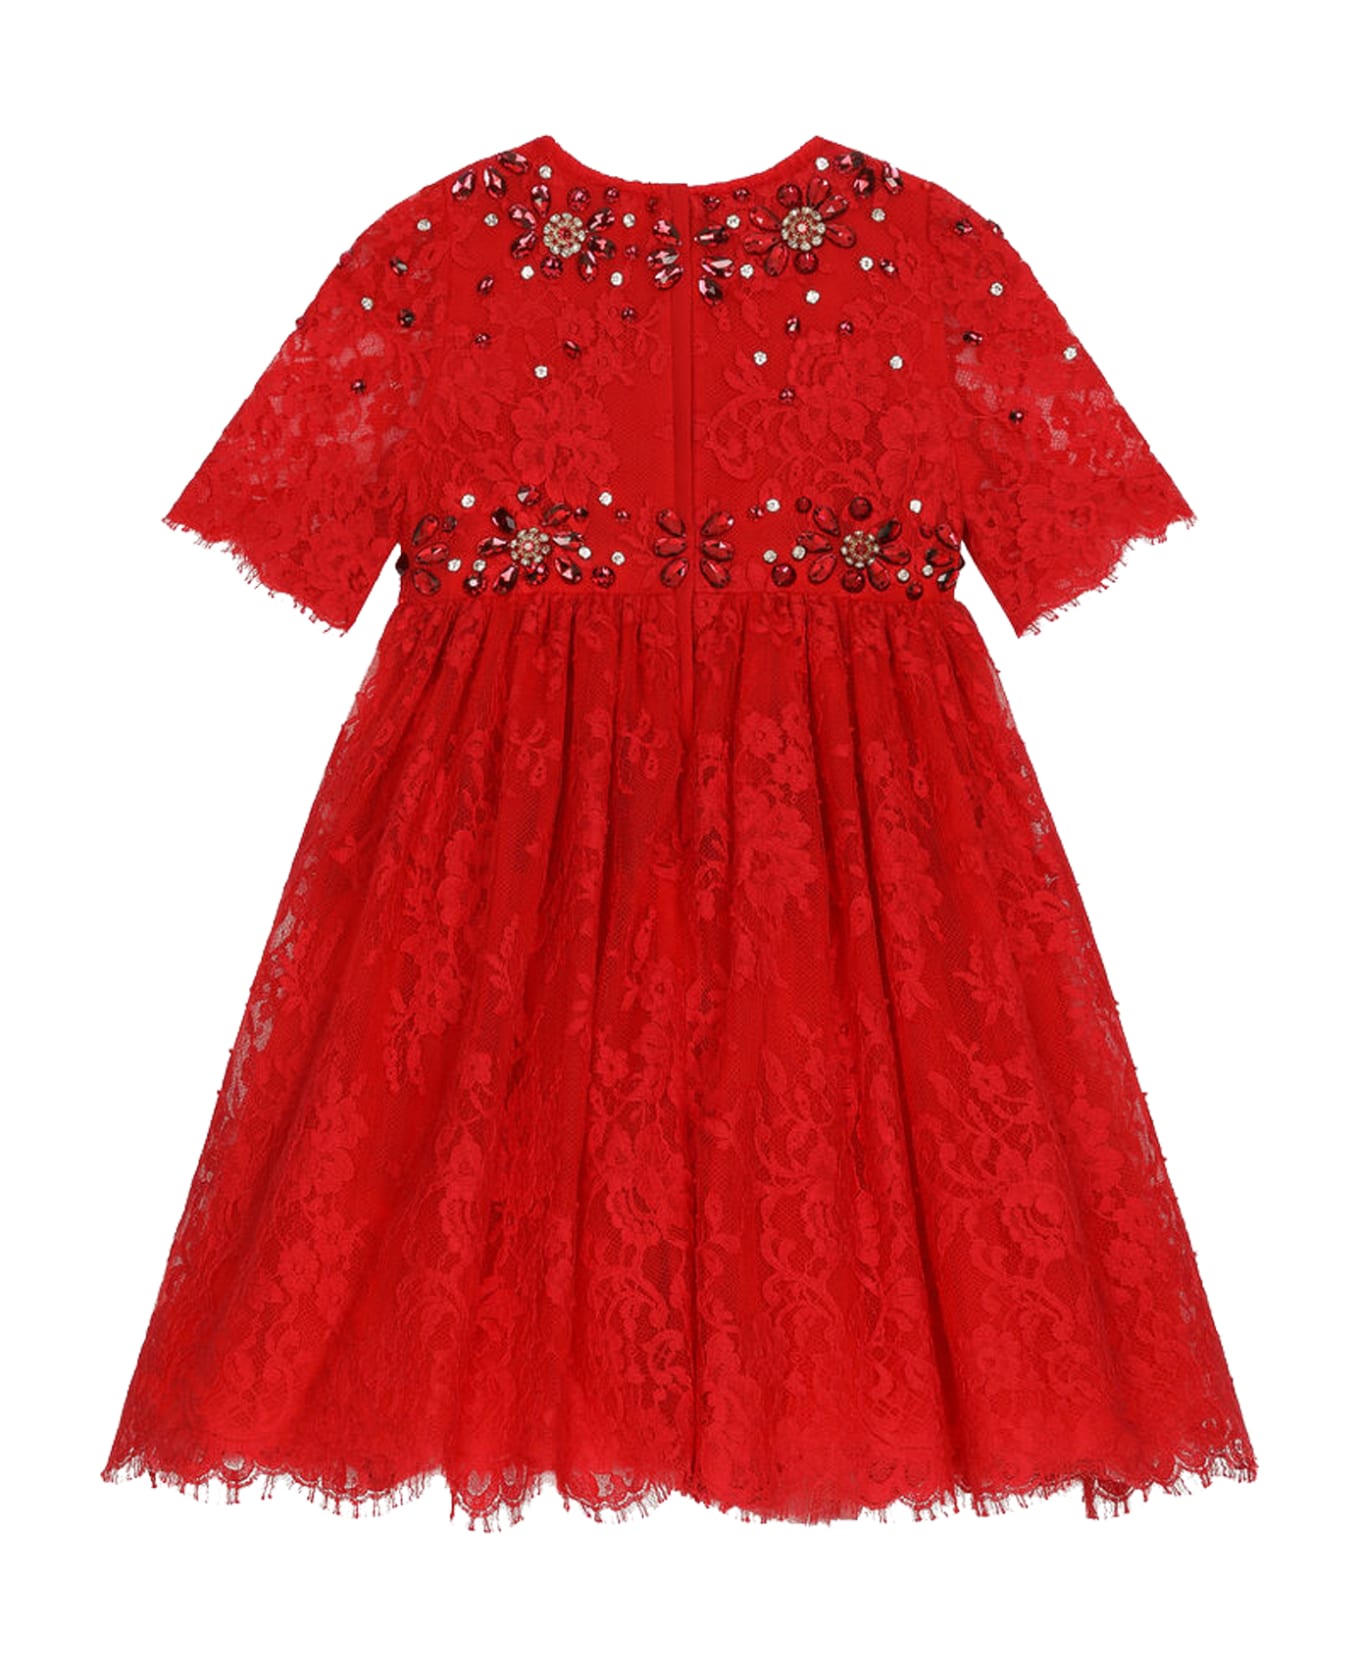 Dolce & Gabbana Dress In Chantilly Lace And Stones - Red